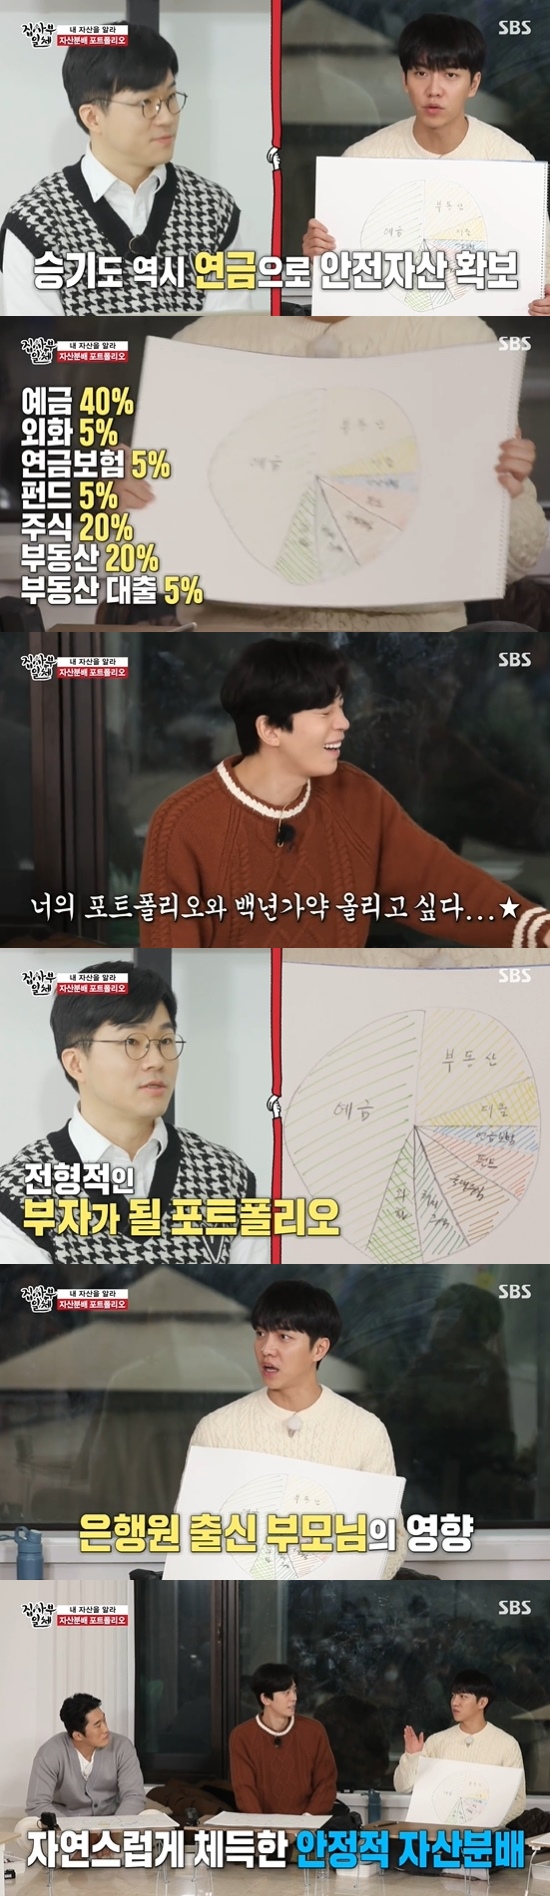 All The Butlers Lee Seung-gi revealed the Asset distribution table, and bought the envy of the members.On the 28th SBS All The Butlers, Shuka appeared as a master and advised members about investment.Shuka, who is working as an economic creator, appeared as a master.Shuka said, When I worked as a pro-trader, I worked for a few hundred billion won, and when I was a fund manager, I was a group of funds because it was national money.Shin Sung-rok begged Shuka to tell him about the stock, and Lee Seung-gi revealed that he disposed all of the domestic stocks because this type of KOSPI fell a little.In response, Shin Sung-rok stated that he was too scared when he fell; Kim Dong-Hyun told Shukas appearance: Why do I go up when I sell and fall if I buy?Im really curious. Are you looking at me? I laughed and laughed.Thats natural, said Shuka, if you go up, you live. Of course there are times when you fall, and then you sell again.No one can match the short-term price. Shuka stressed that the Asset allocation was the first step in investment, followed by the members Asset allocation table.Kim Dong-Hyun advised that there were only risk assets such as stocks, virtual currencies, and real estate, and Shuka should allocate assets to secure safety assets.Shin Sung-rok said that real estate and loans were 40 percent each and stocks 20 percent, which is the general portfolio of the nation.Yang Se-hyeong had 75% of the shares, but secured safety Assets such as pensions and deposits, and had his own clear goal.Shuka praised Yang Se-hyeong for saying that he should approach.The following is Lee Seung-gis portfolio; Lee Seung-gis deposits accounted for the largest portion with 40%, while stocks and real estate accounted for 20%.Foreign currency, pension insurance, funds and real estate loans were 5% each, and Shin Sung-rok, who saw them, smiled, holding his hand gently, saying, Cant you marry me?Kim Dong-Hyun also said, Its too much to be a sucker, and Yang Se-hyeong said, I did well.Shuka said that Lee Seung-gis portfolio was a typical rich portfolio.Lee Seung-gi revealed that he had reliably distributed Asset due to the influence of his parents, who were former bankers.The first time he bought a stock on the day of recording, Jung Eun-woo was a deposit except for one stock.If my brothers talk about stocks, Im interested, but Im not sure I should care about it, said Jung Eun-woo. I have to invest even if I do not own stocks.Jung Eun-woo asked if he should invest in Risk Asset, and Shuka said, As time goes by, I will feel that the growth rate of Asset is insufficient compared to the surroundings.The Asset gap widens. Schuka, meanwhile, has said about the investment direction to pay attention to in 2021: study and imagine climate change and digital transition.Lee Seung-gi, who became a student of Shuka classroom honors, saw Shukas investment stocks.Photo = SBS Broadcasting Screen